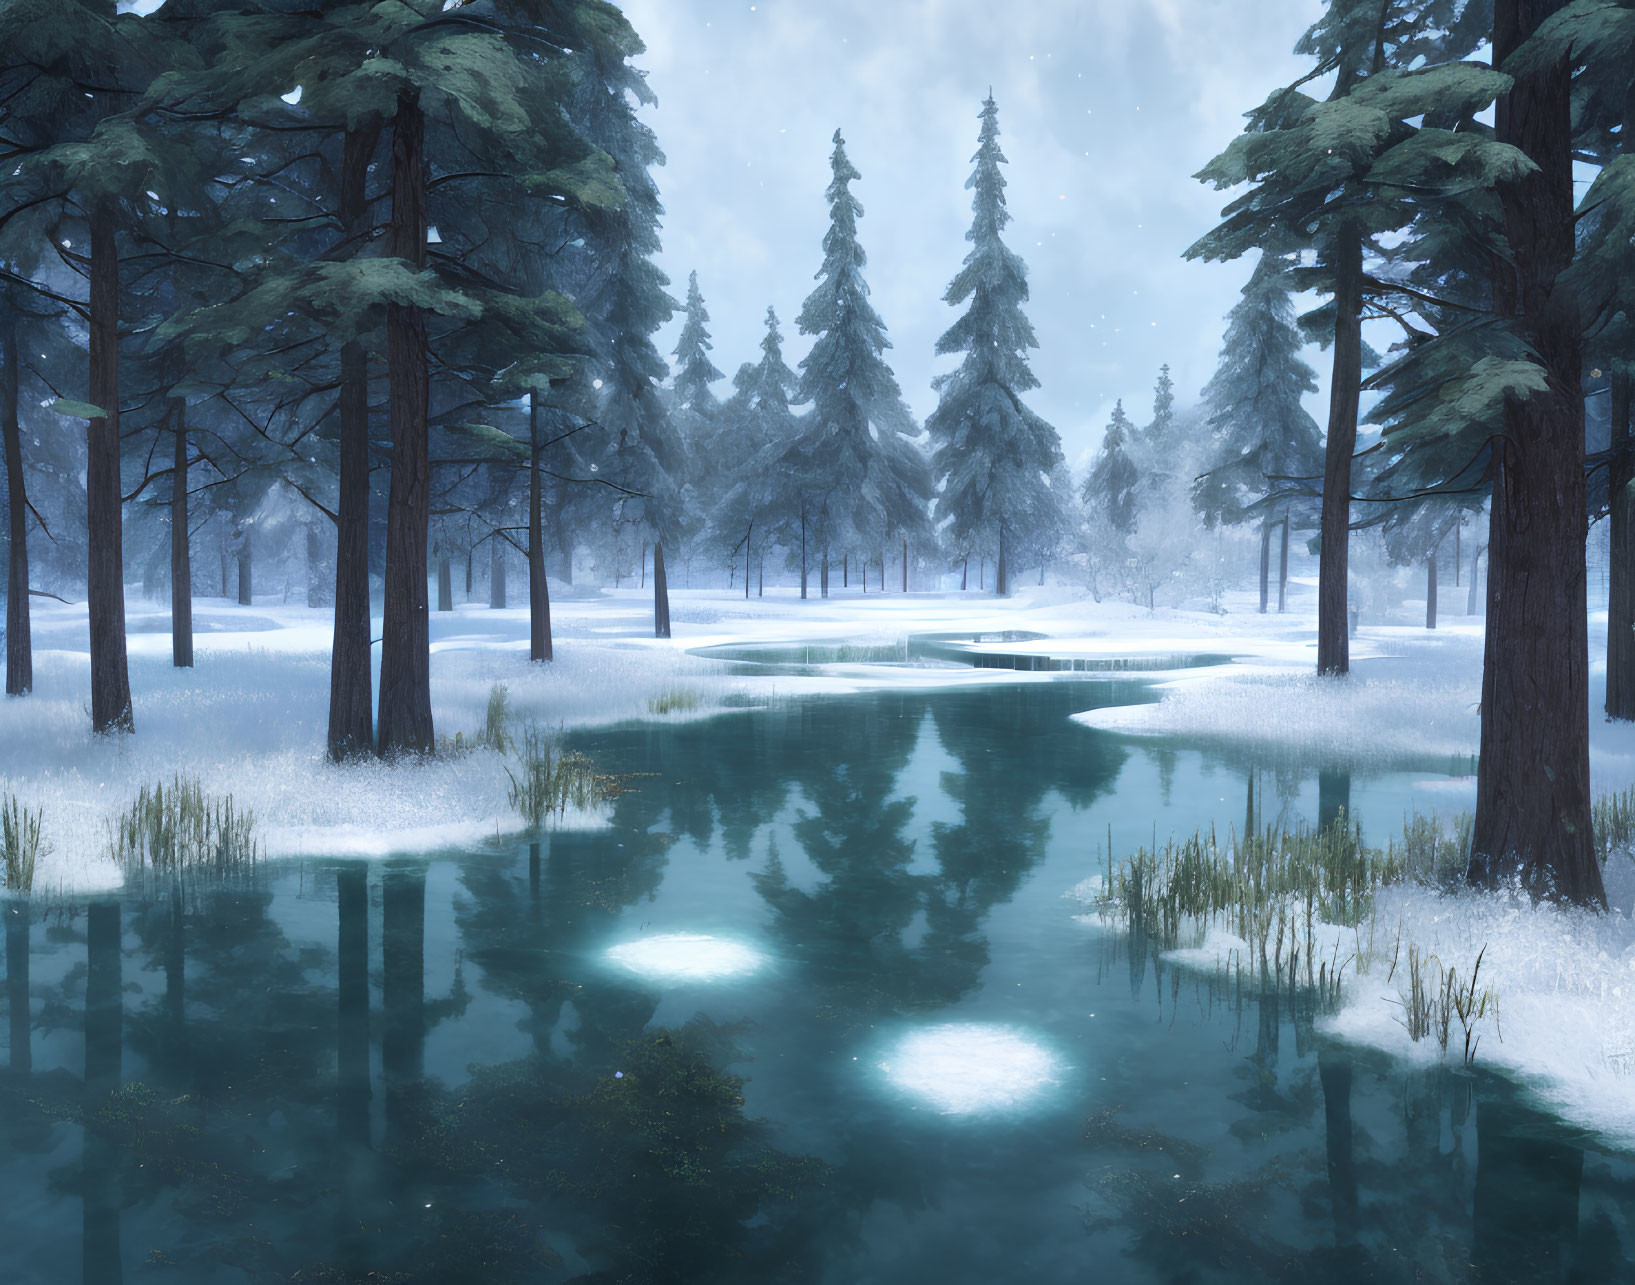 Snow-covered forest with evergreen trees by calm blue river